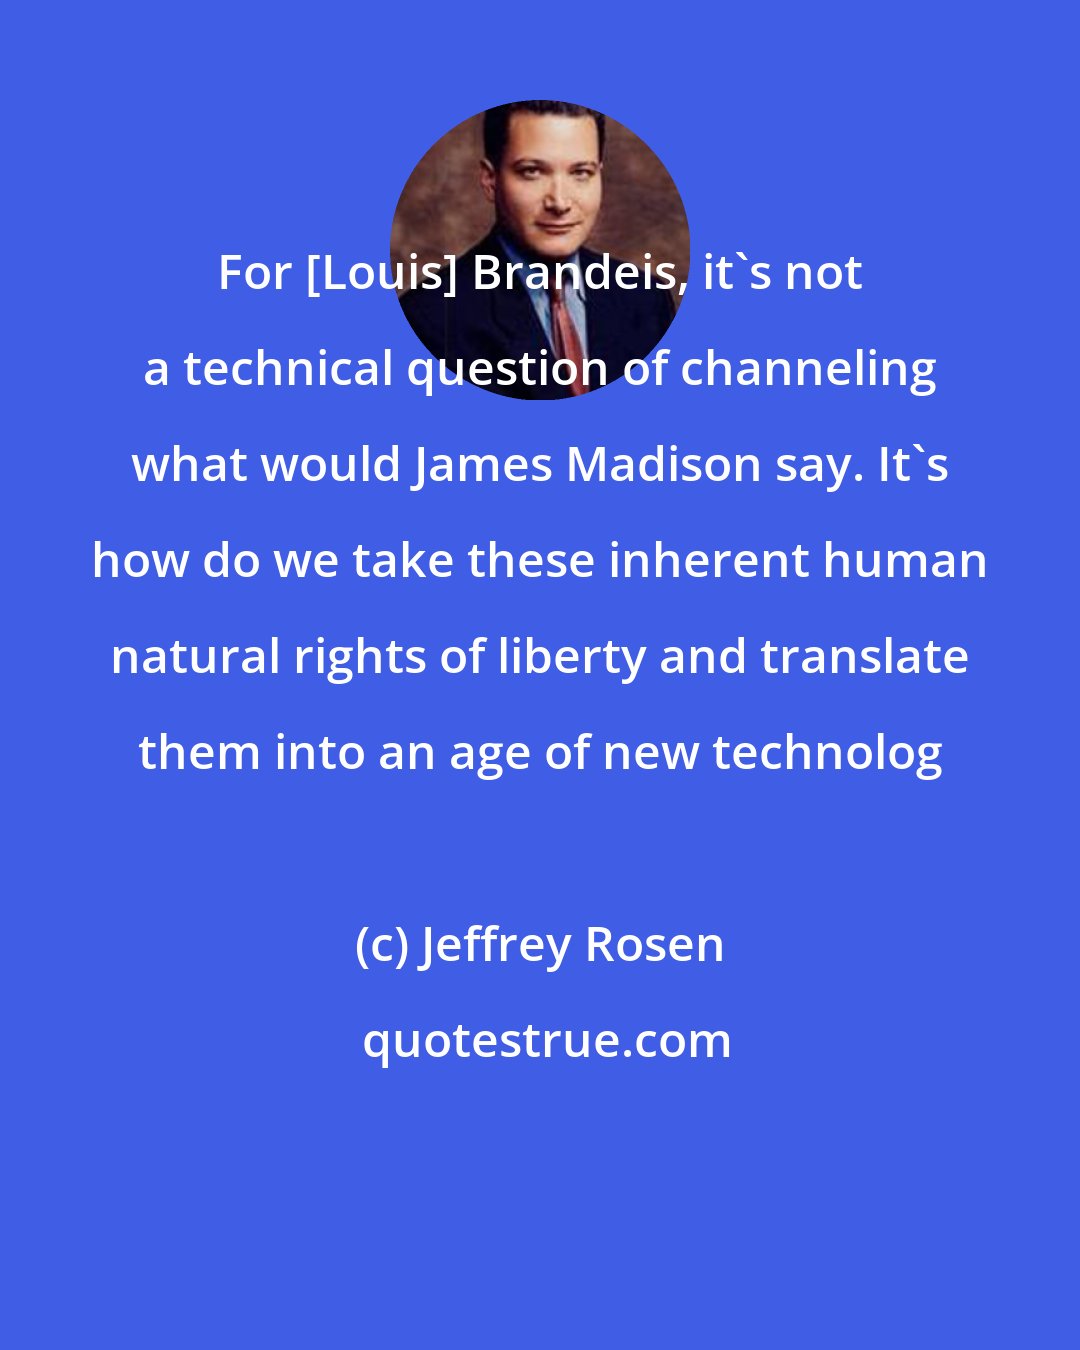 Jeffrey Rosen: For [Louis] Brandeis, it's not a technical question of channeling what would James Madison say. It's how do we take these inherent human natural rights of liberty and translate them into an age of new technolog